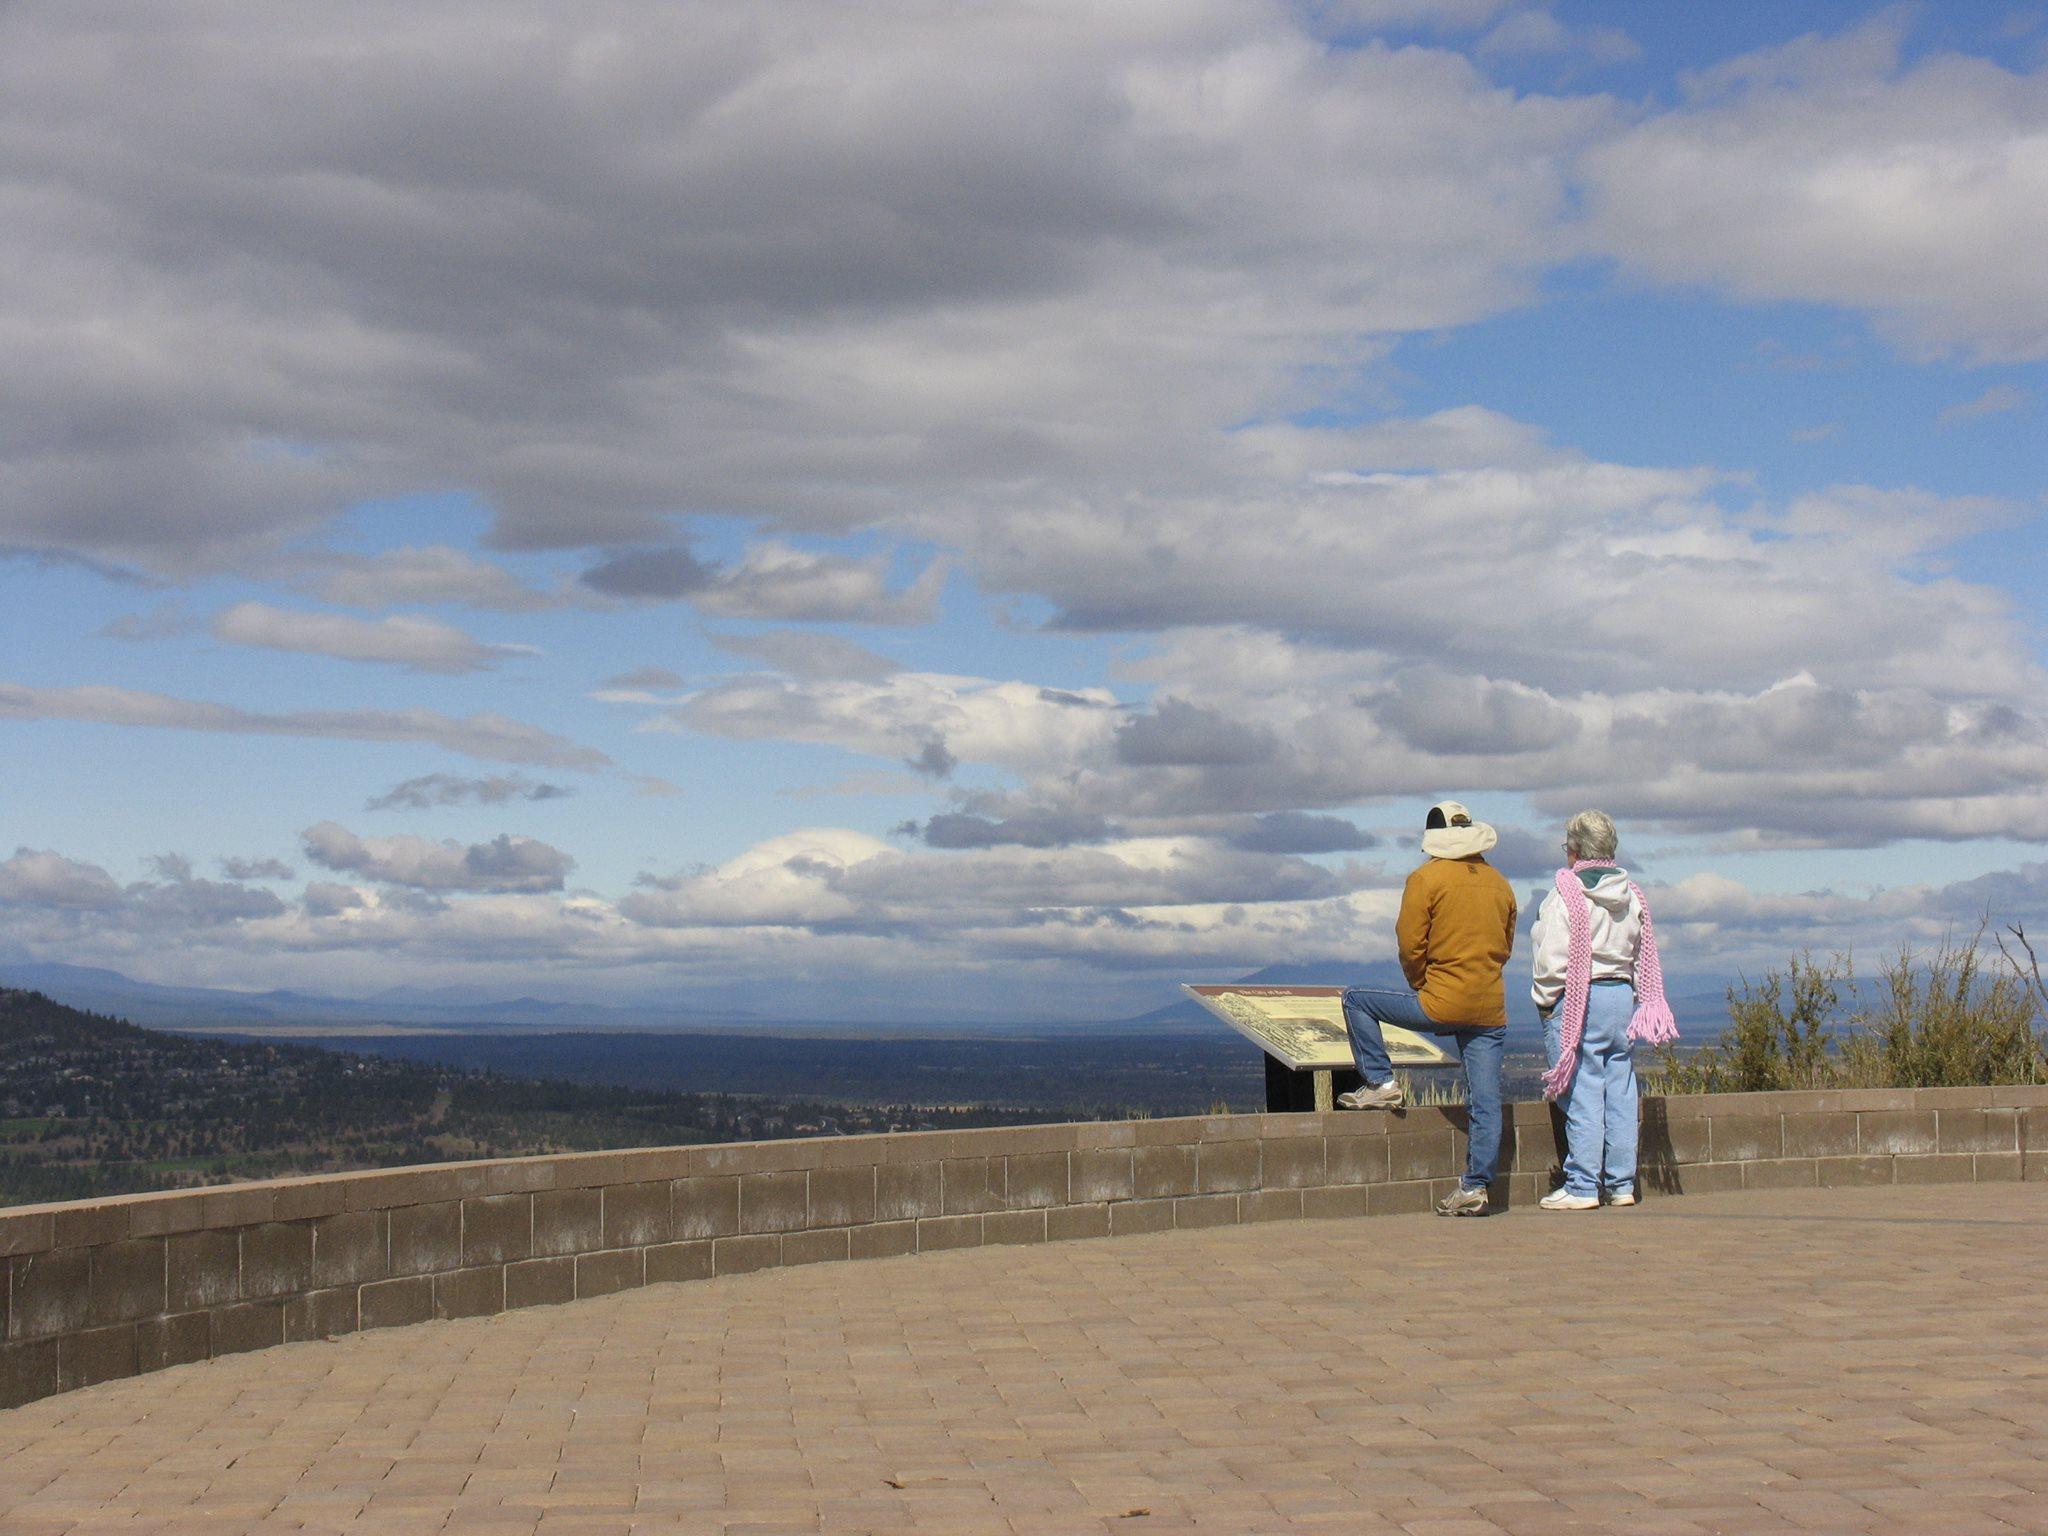 Pet Friendly Pilot Butte State Scenic Viewpoint